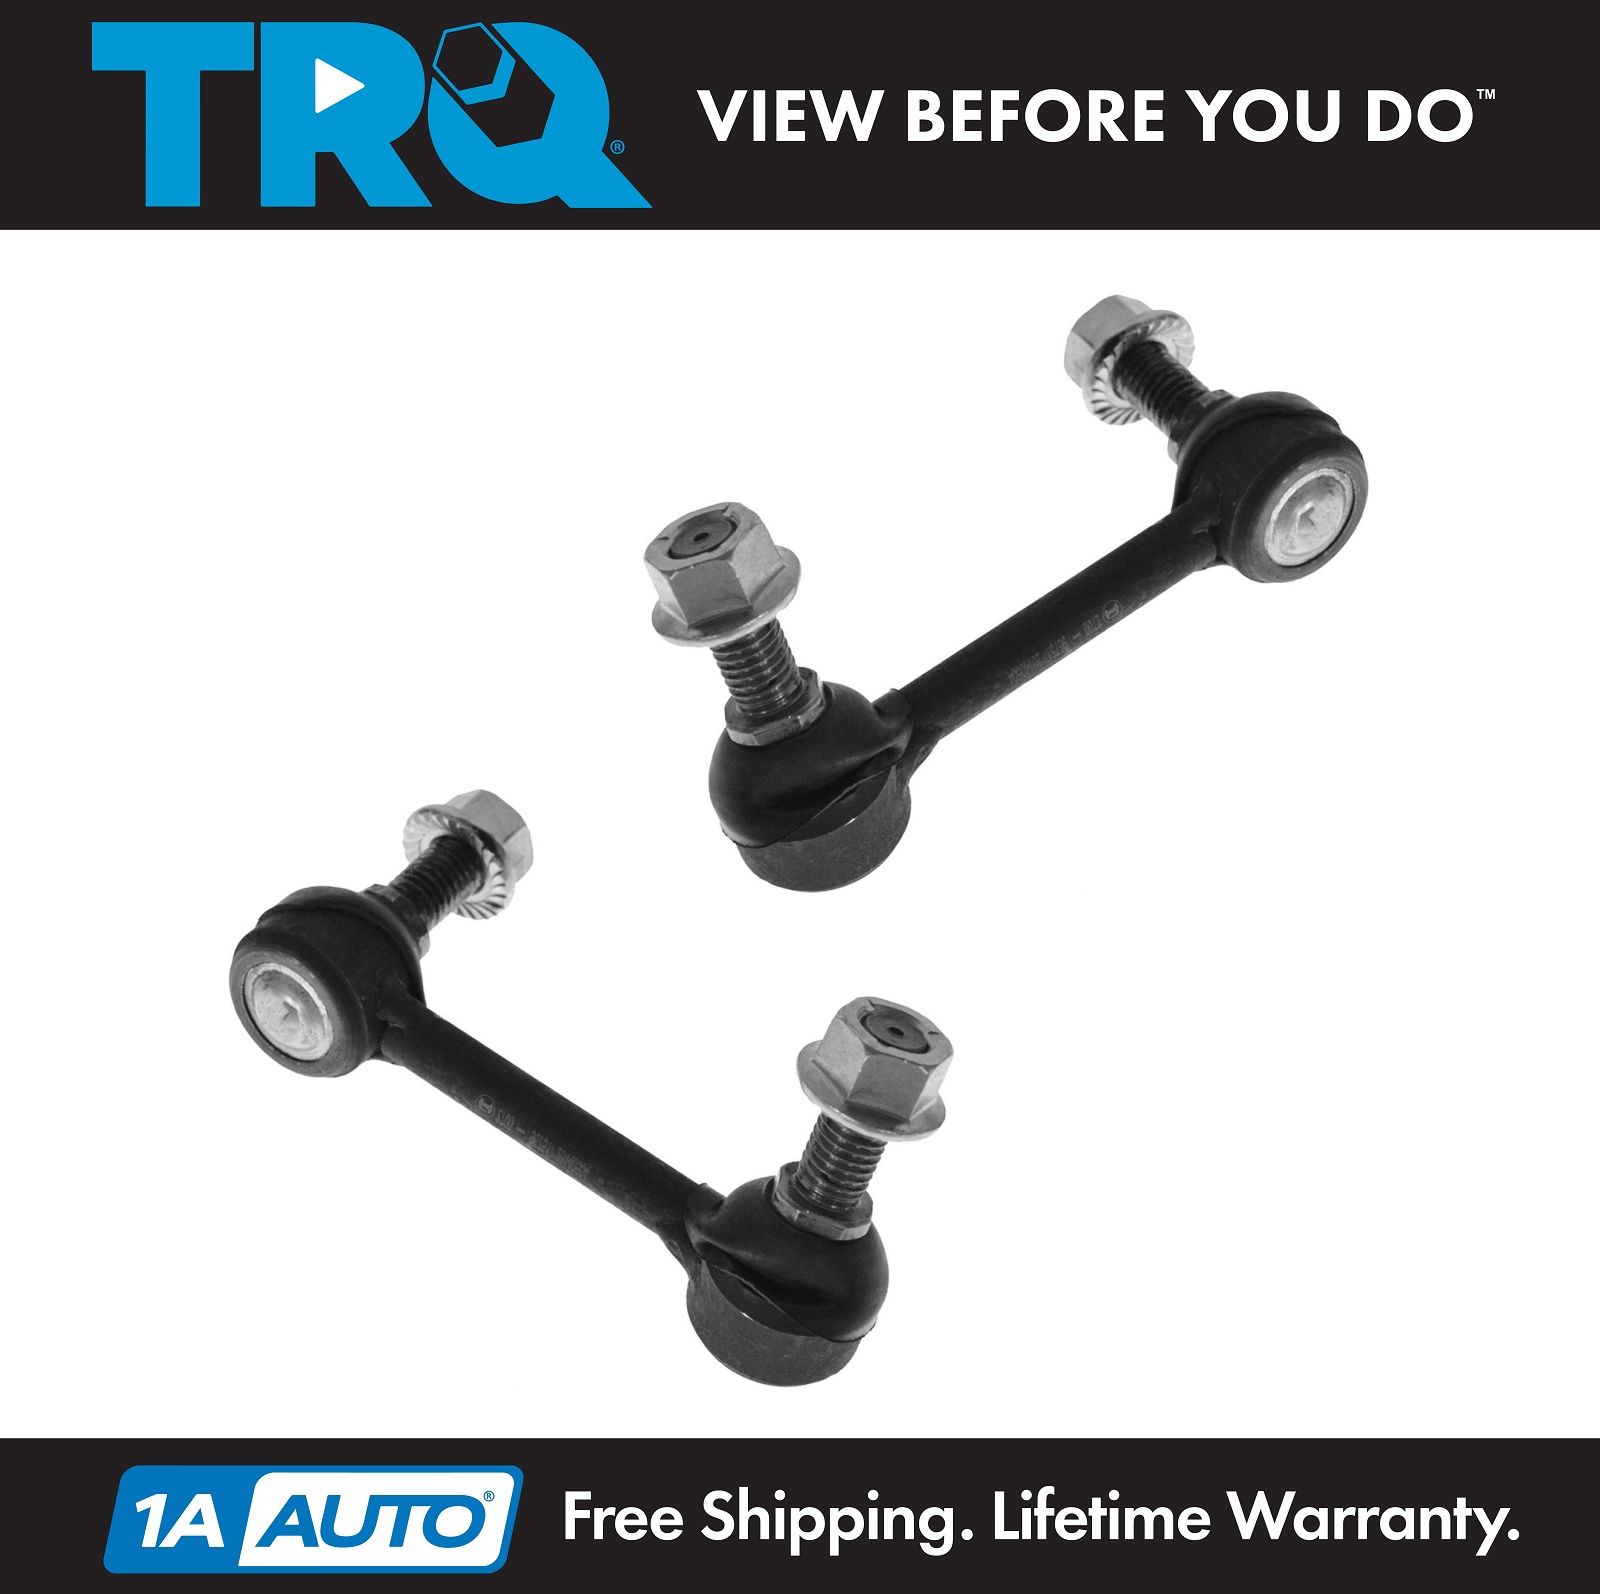 NEW Sway Bar Stabilizer Link Front Left Right Pair for Buick GMC Chevy Saturn